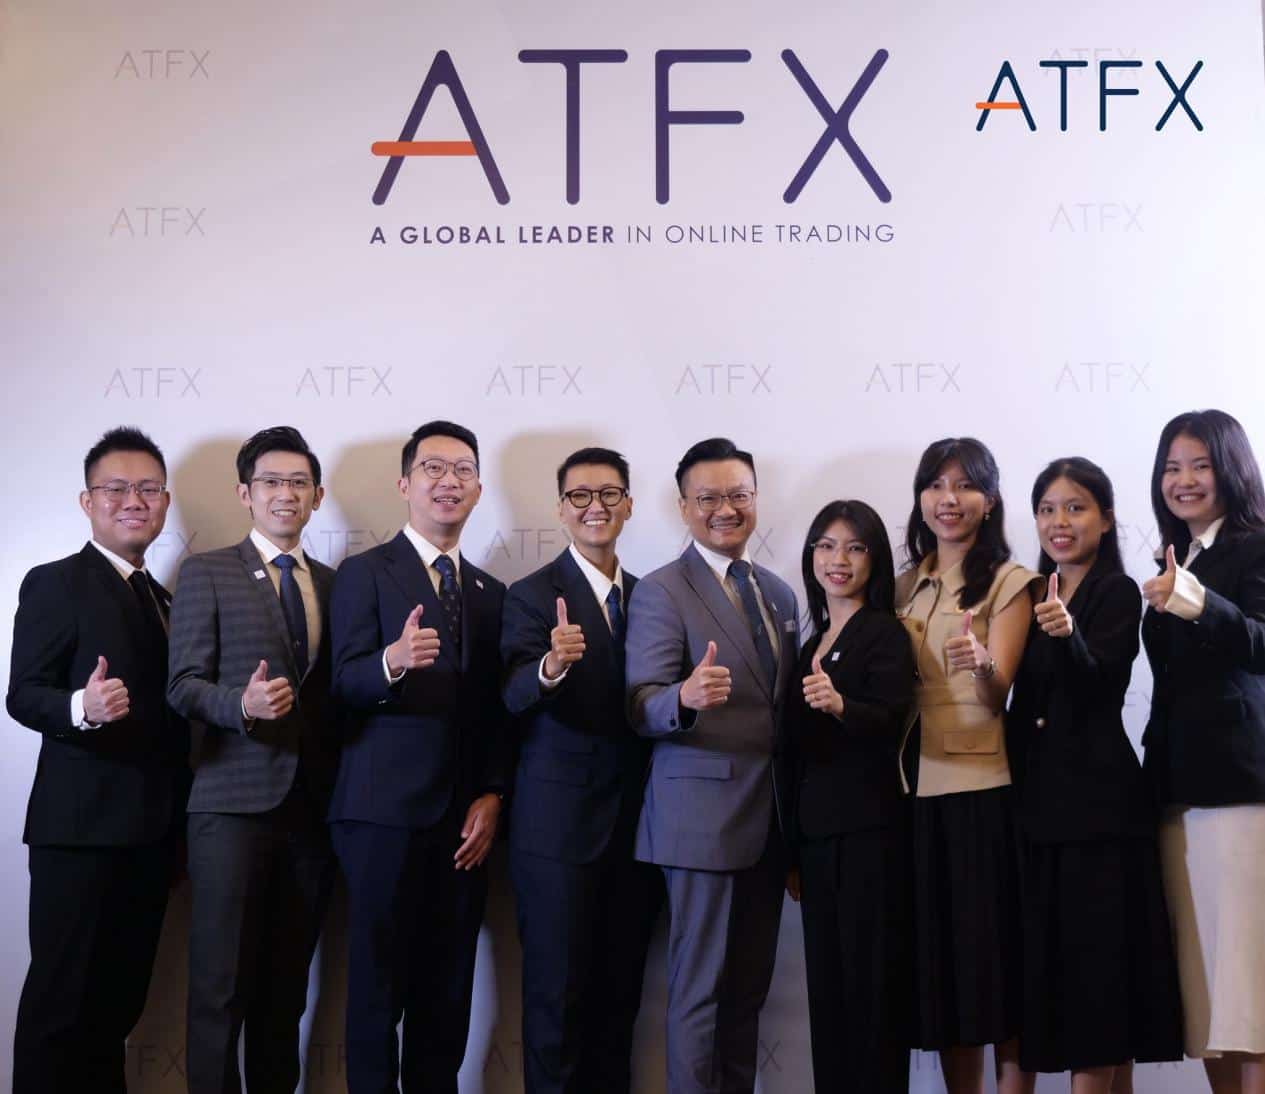 BOSSPlan to open a new chapter,ATFXOpening a New Chapter in the Education Investment Plan: Entering Vietnam960 / author:atfx2019 / PostsID:1726756